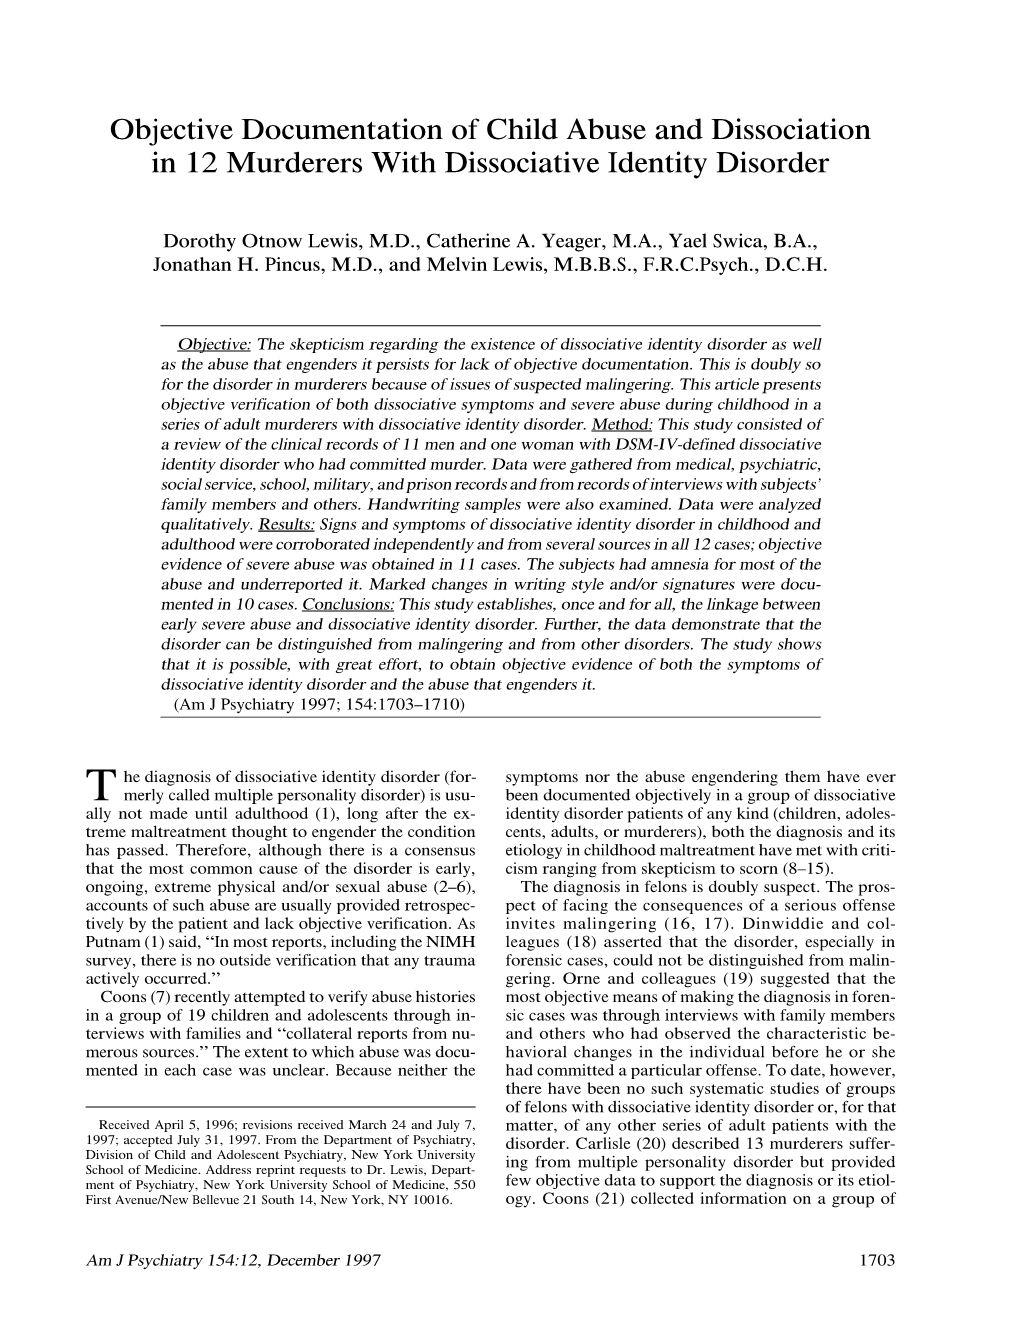 Objective Documentation of Child Abuse and Dissociation in 12 Murderers with Dissociative Identity Disorder